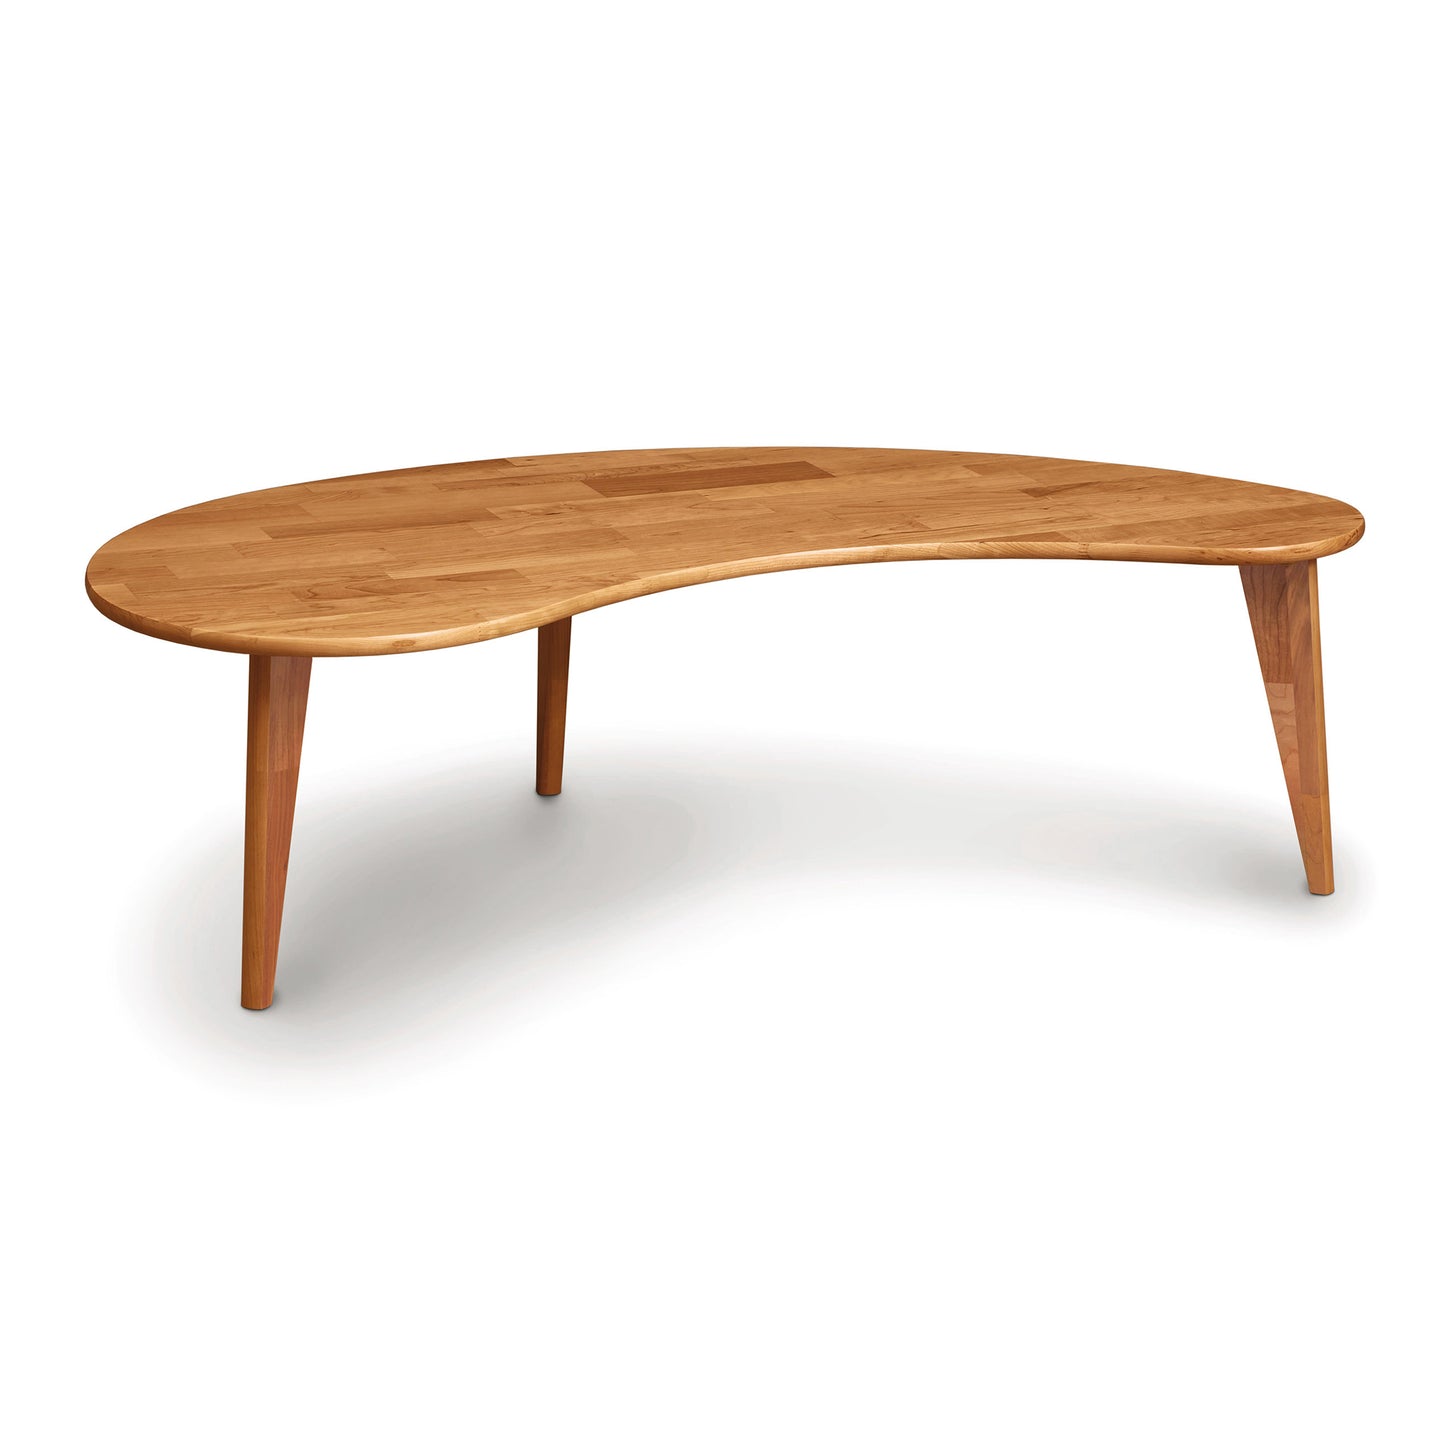 Essentials Kidney Shaped Coffee Table with Wood Legs